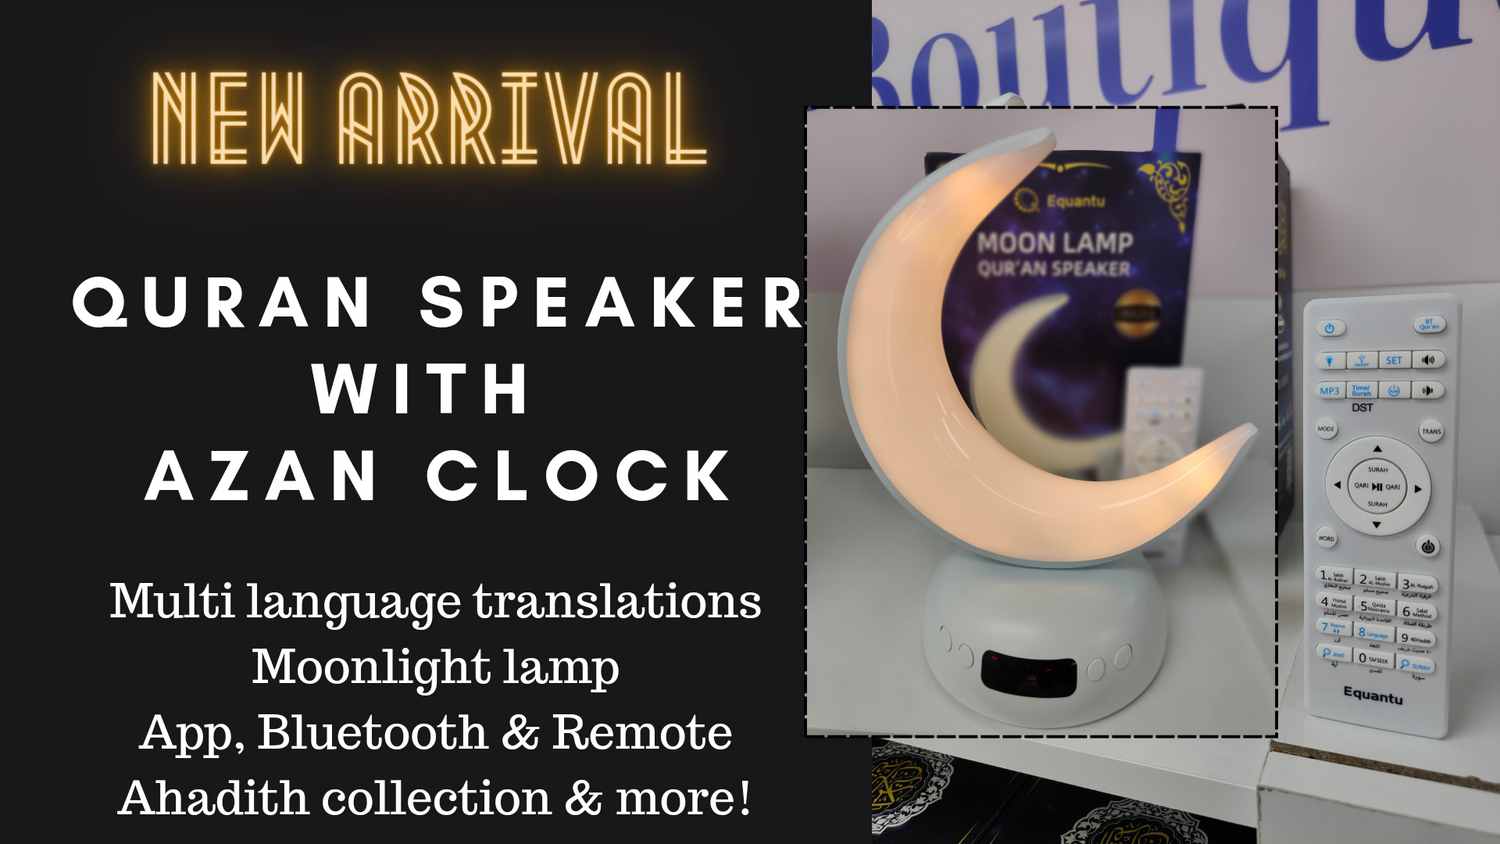 Elevate your spiritual journey with premium moon light Quran Speaker with Azan Clock by Hikmah Boutique. Featuring Azan Clock, Bluetooth control and convenient App control.